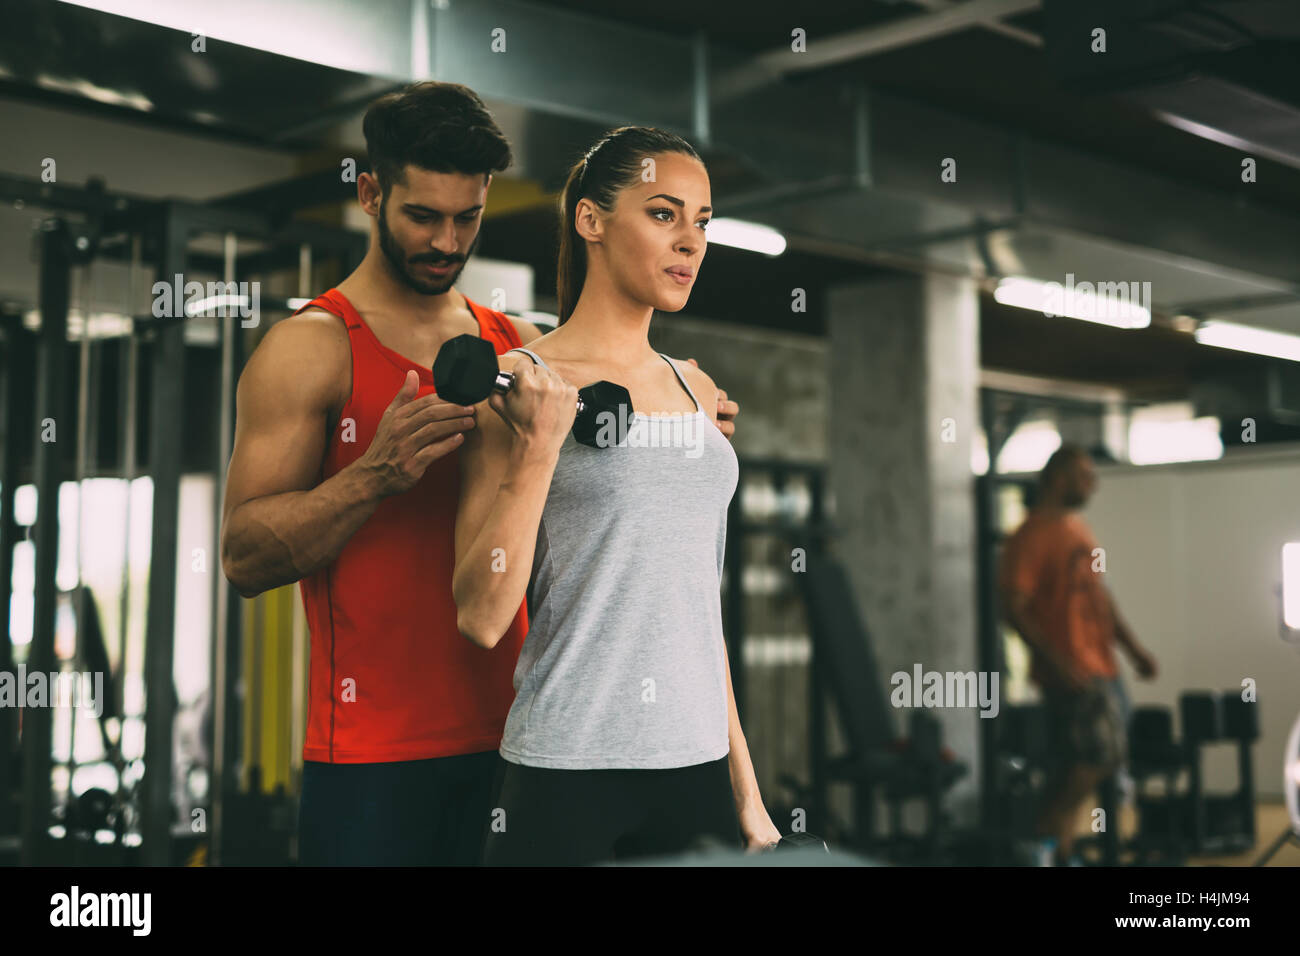 Personal Trainer Instructing Trainee In Gym Stock Photo Alamy